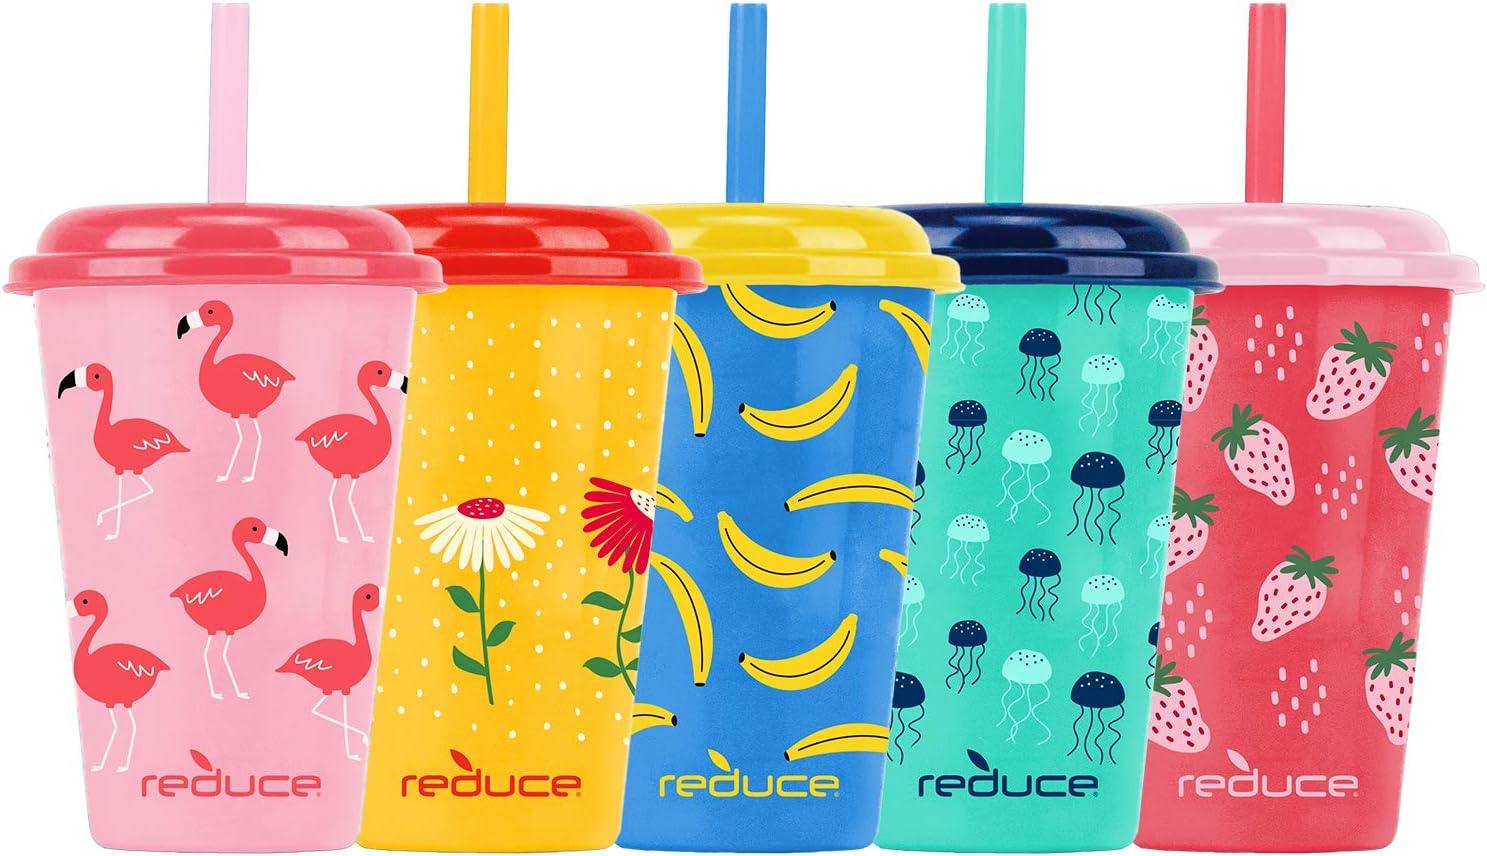 Reduce GoGo's 12 oz Cup Set 5 Pack Plastic Cups with Straws and